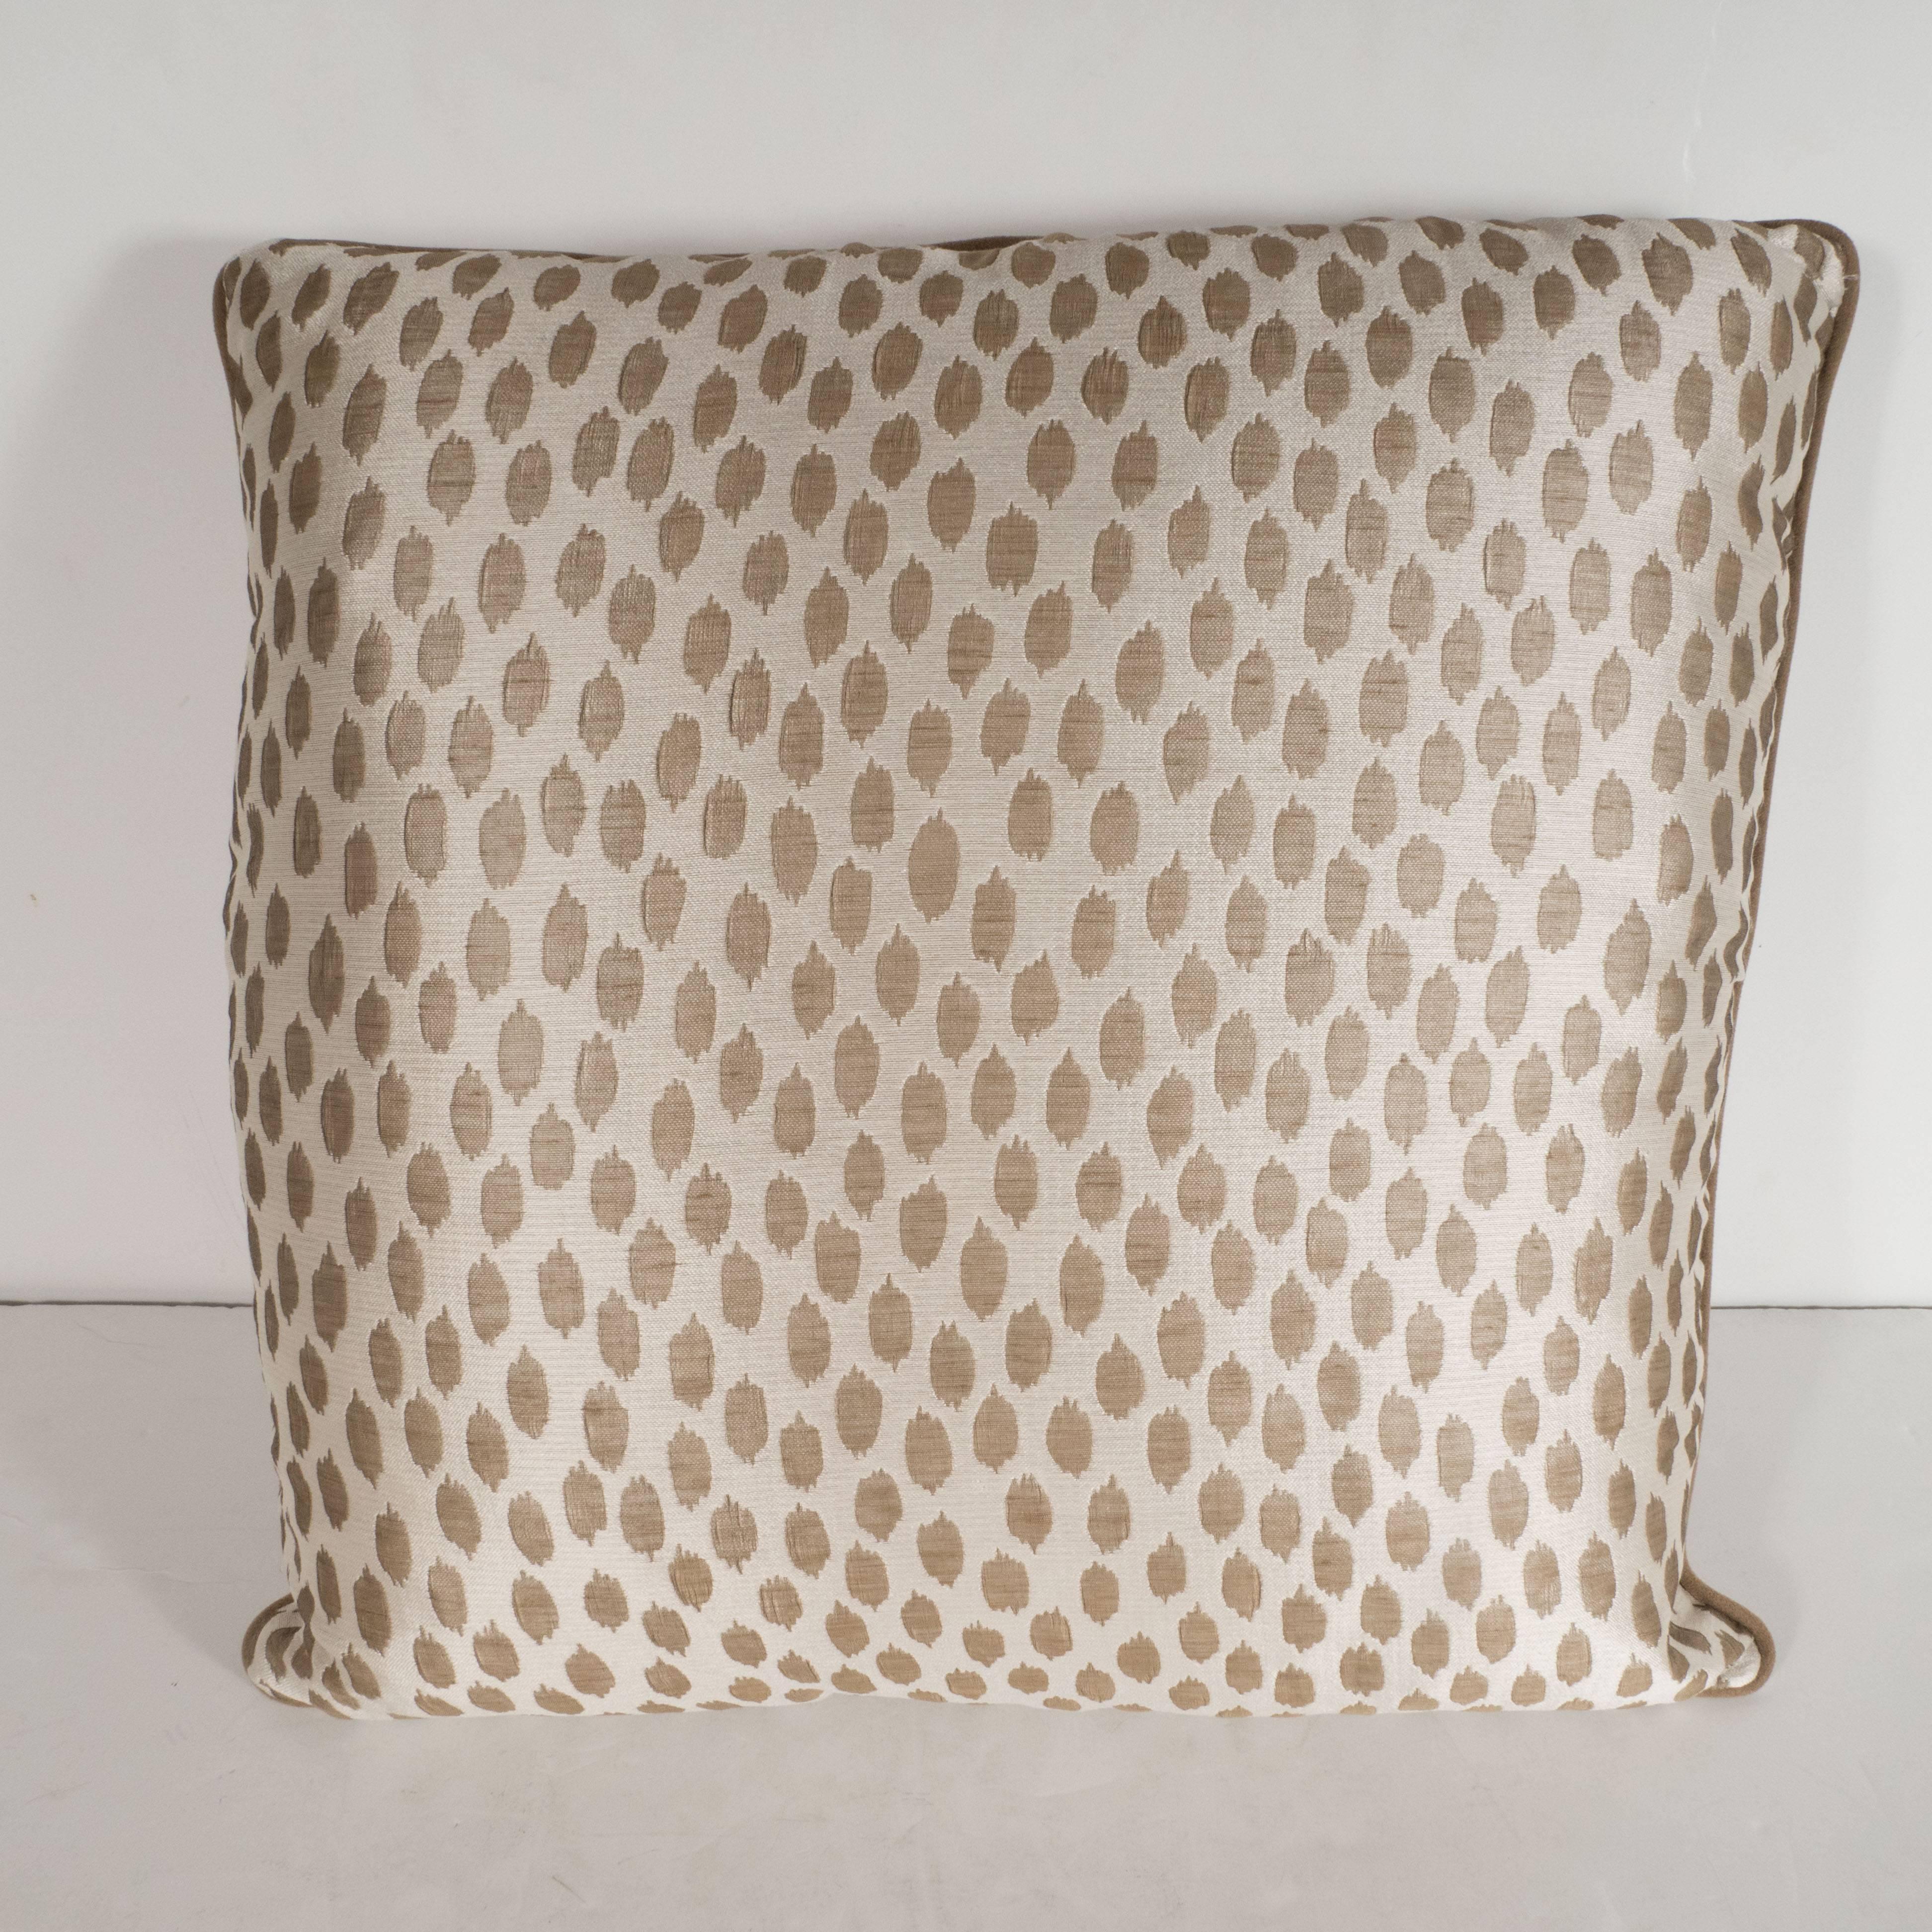 This elegant pair of square modernist pillows features organic forms in muted gold hue- with piping in a matching tone- that float against an ecru background with a horizontal weave. With its austere form and sophisticated fabric, this pillow would